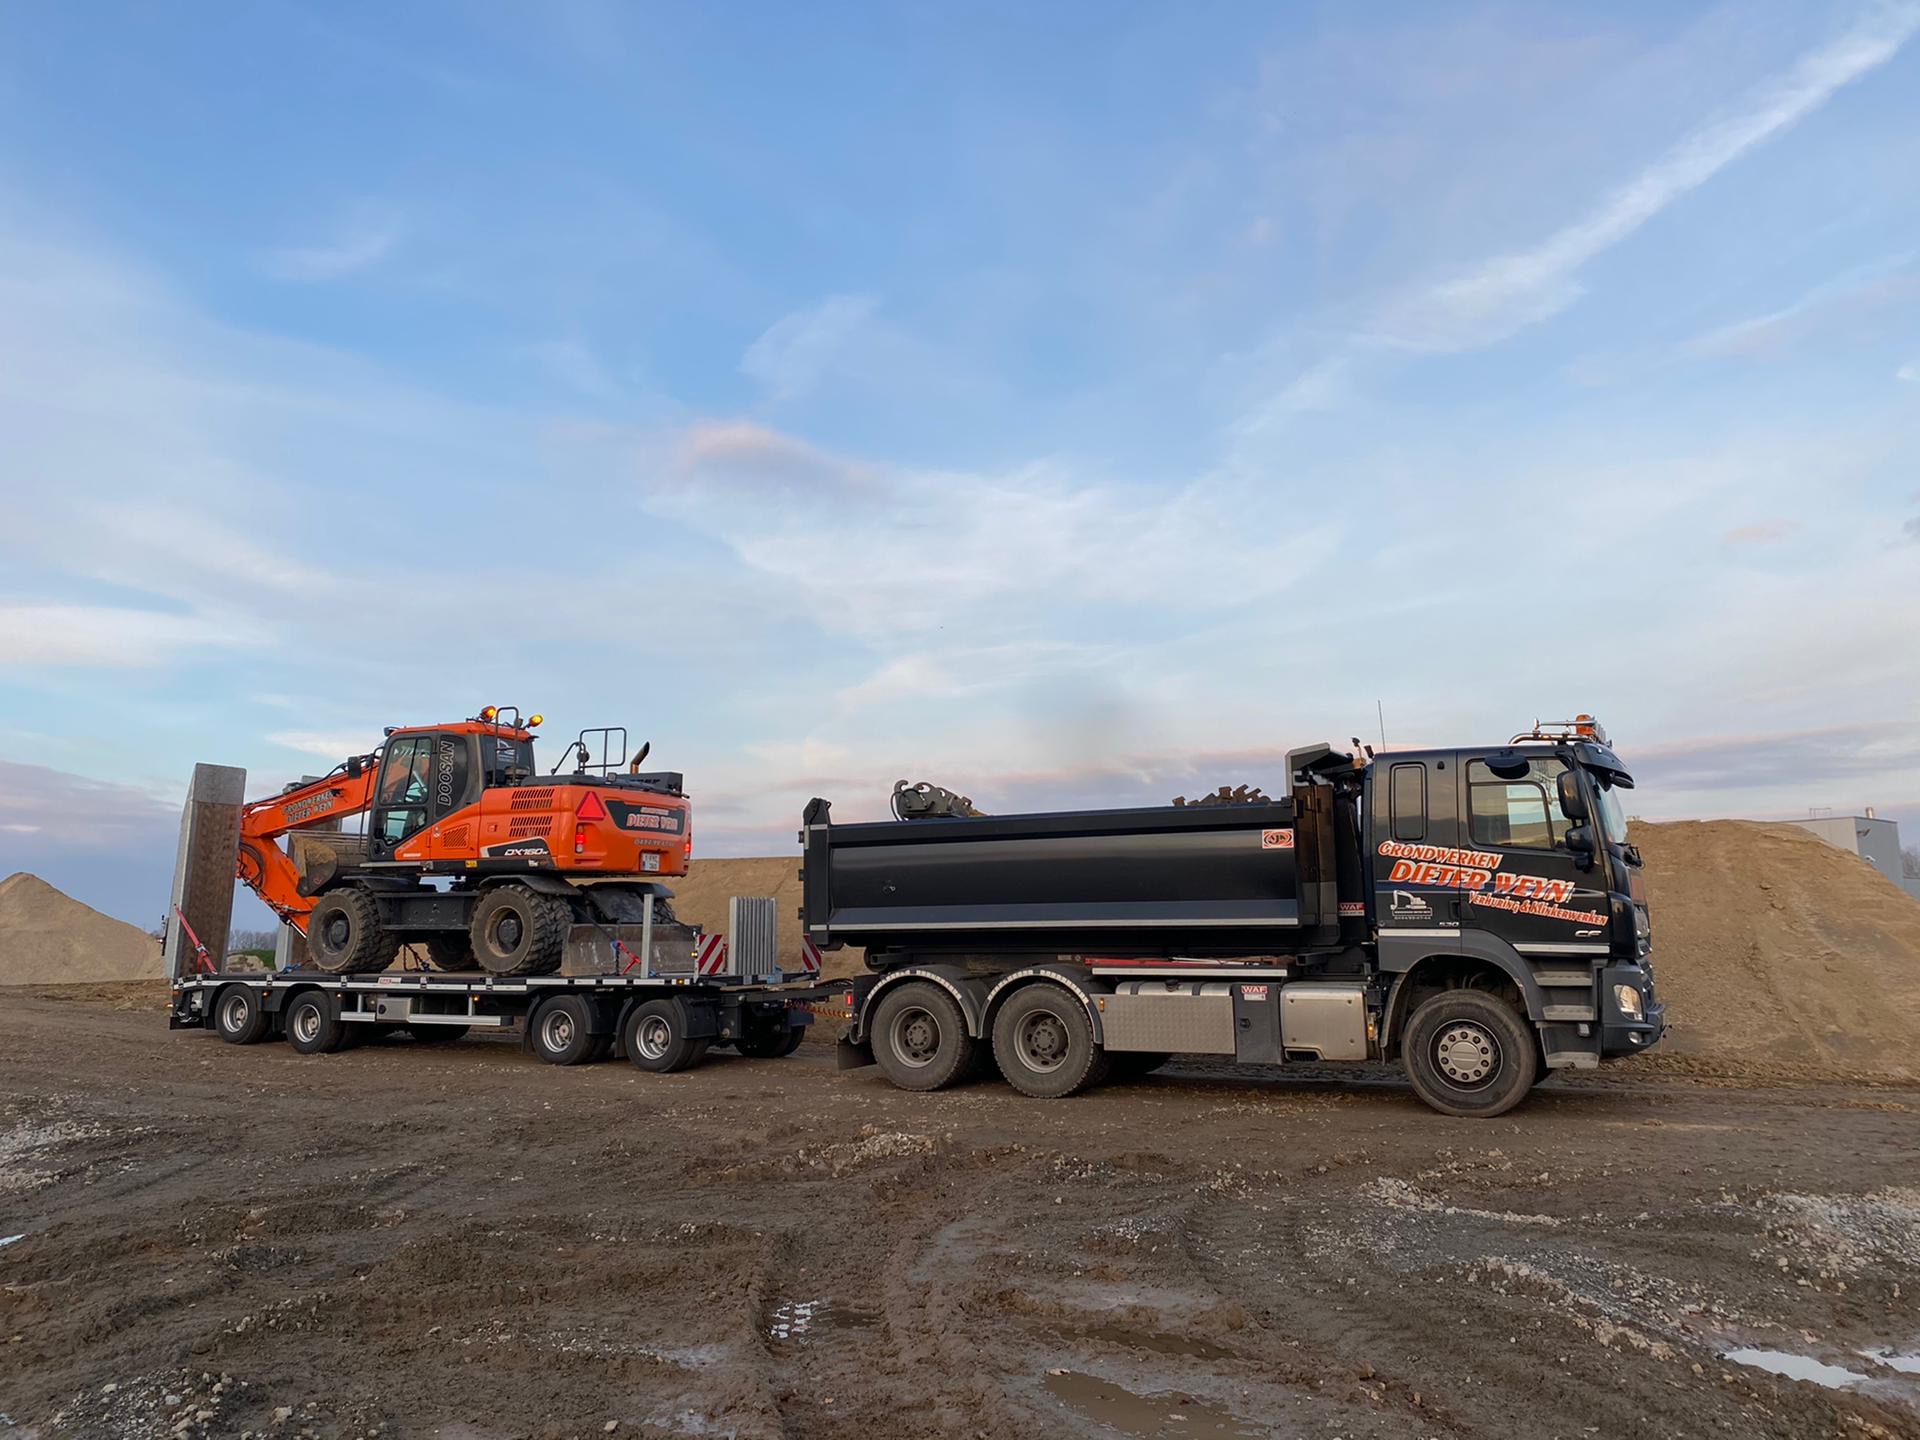 Towed turntable trailers MAX600 by MAX Trailer work on each construction site.